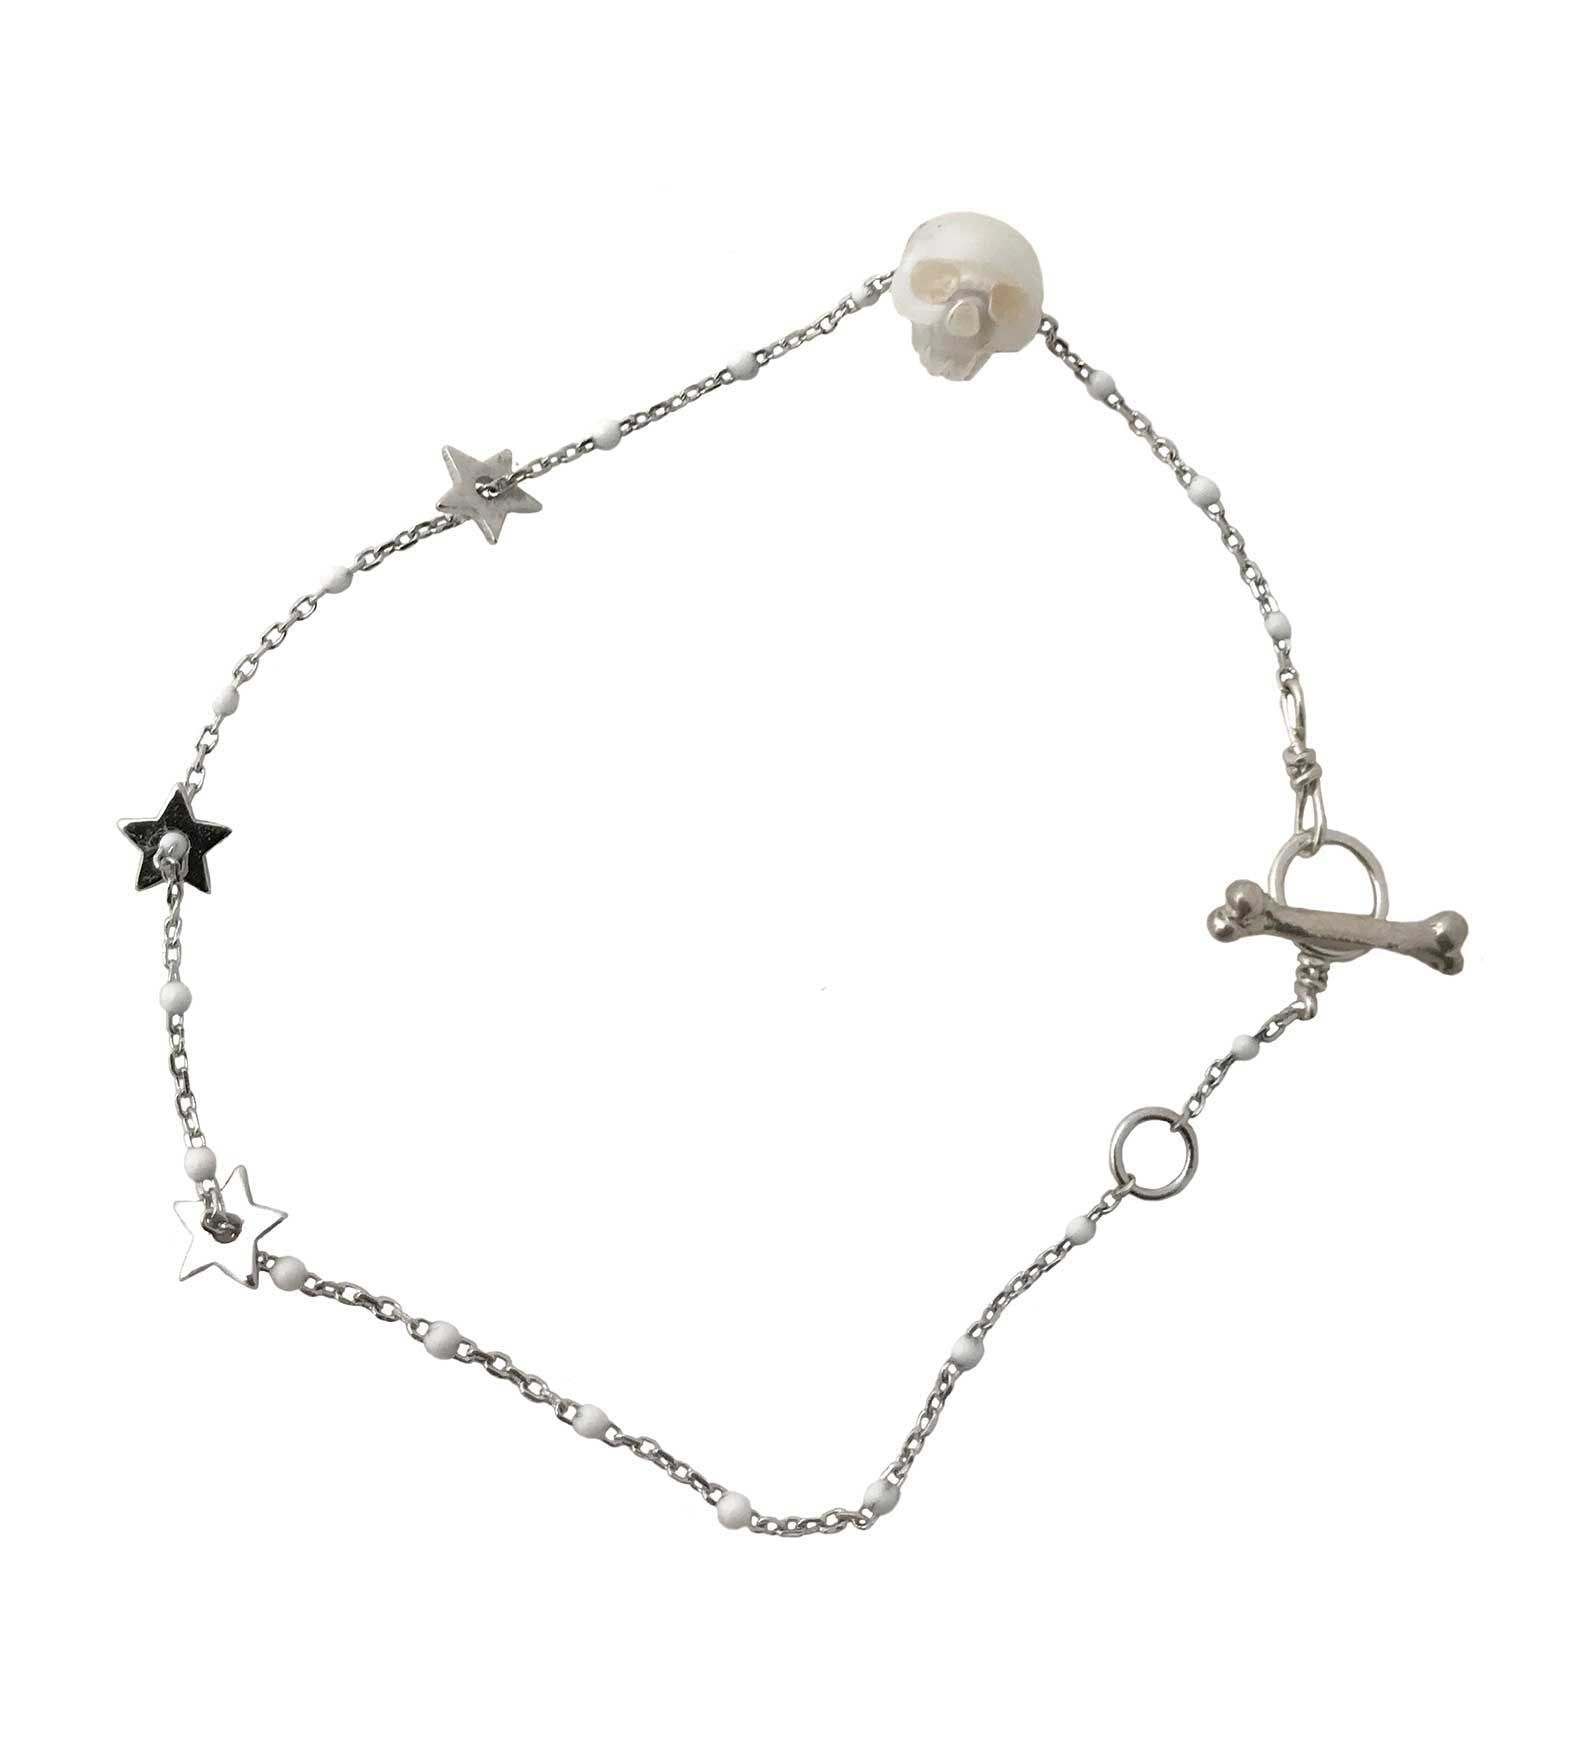 Pearl Skull Bracelet in silver and white - Anomaly Jewelry